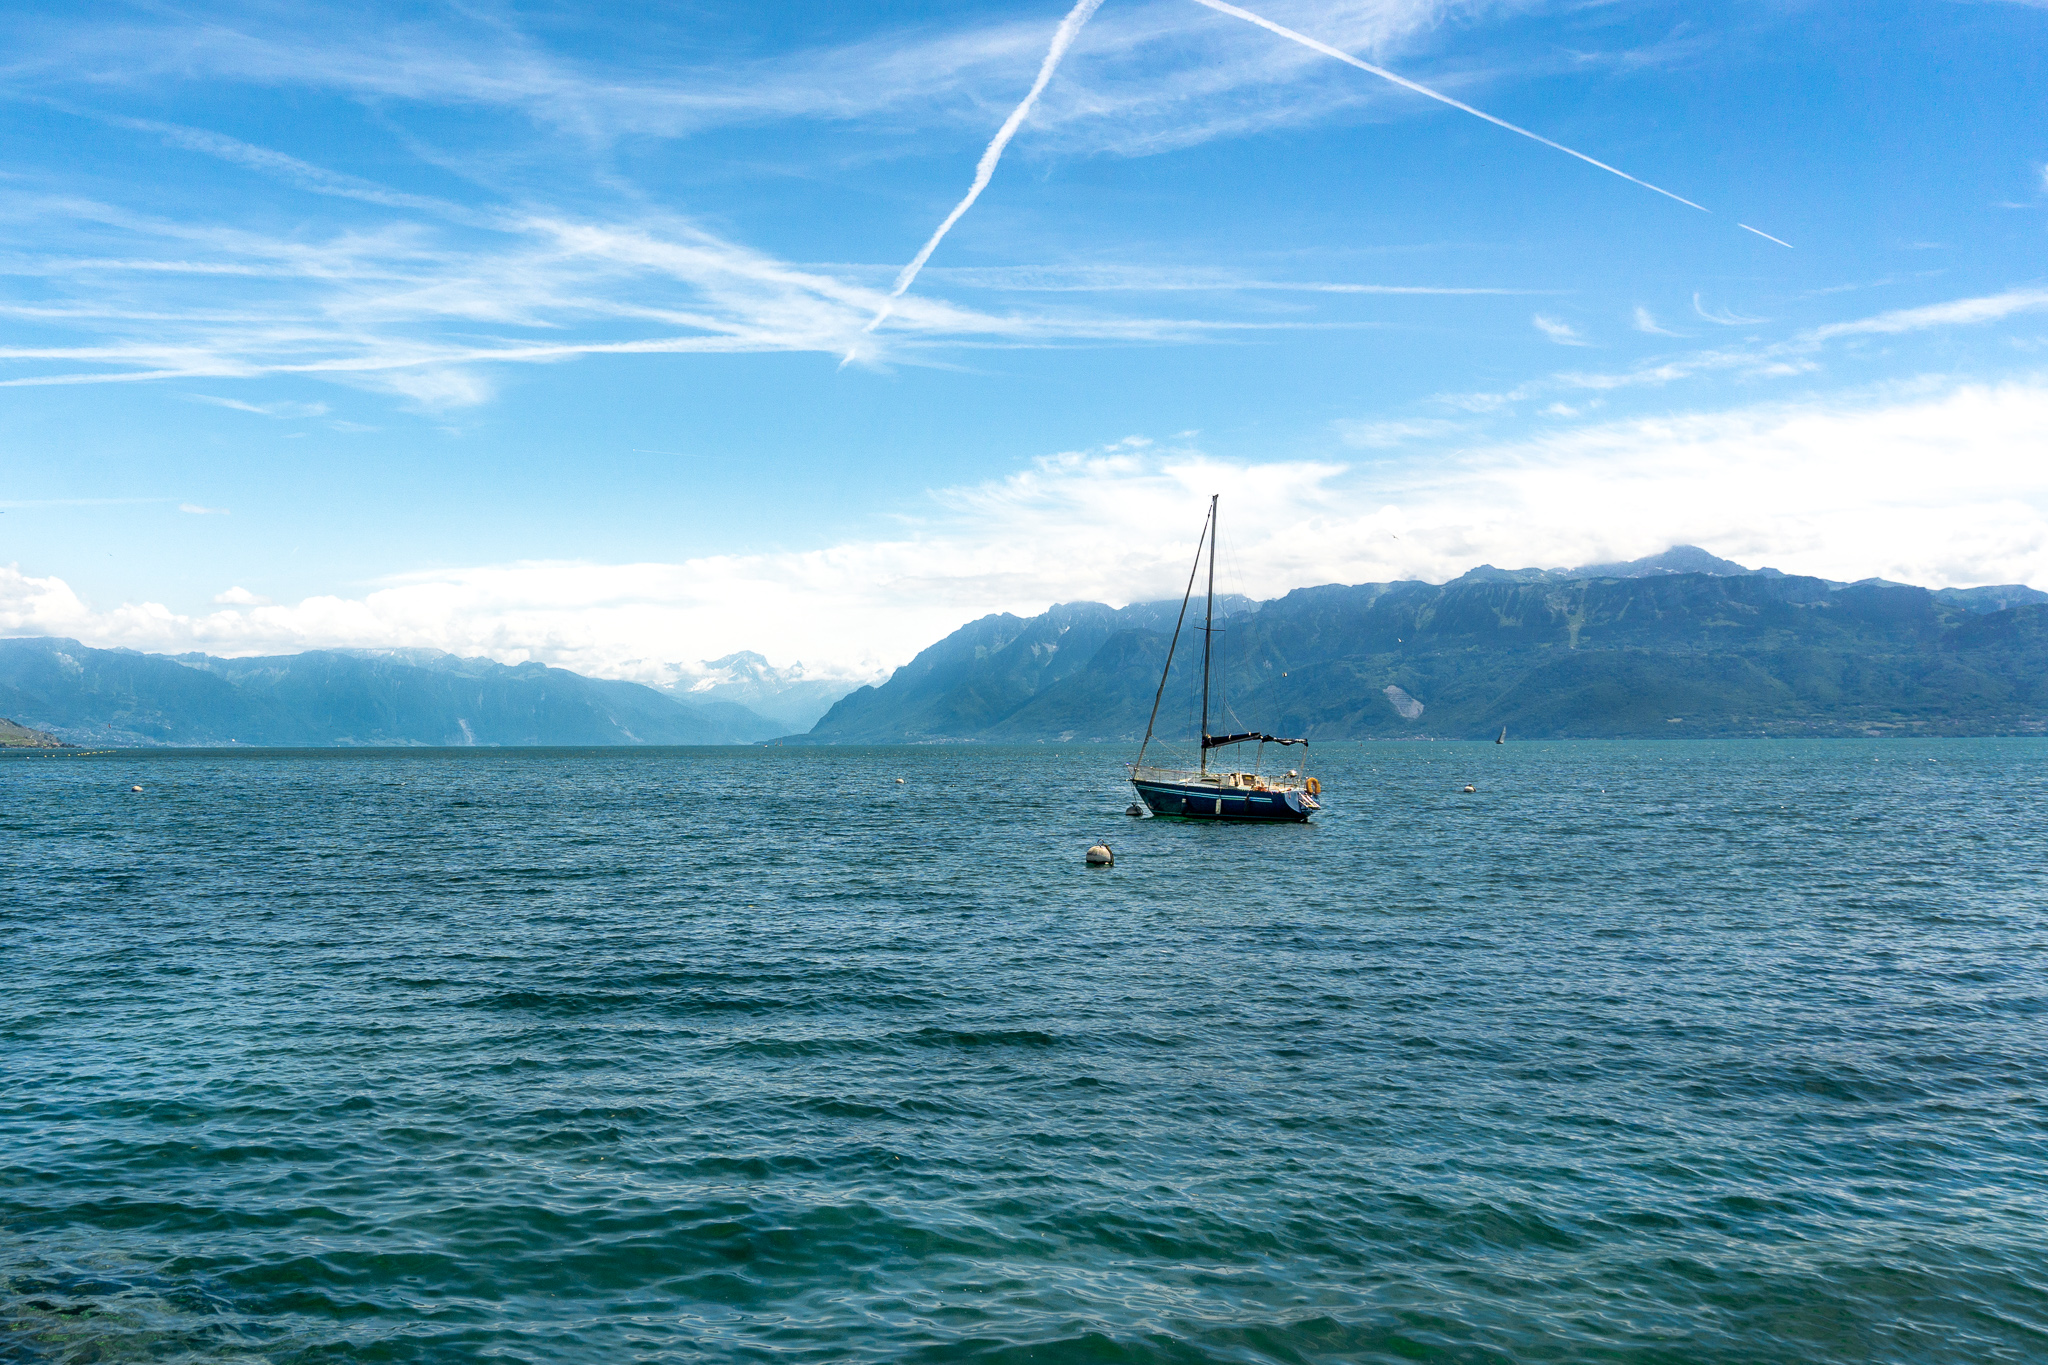 One Day In Lausanne, Switzerland - Best Things To Do